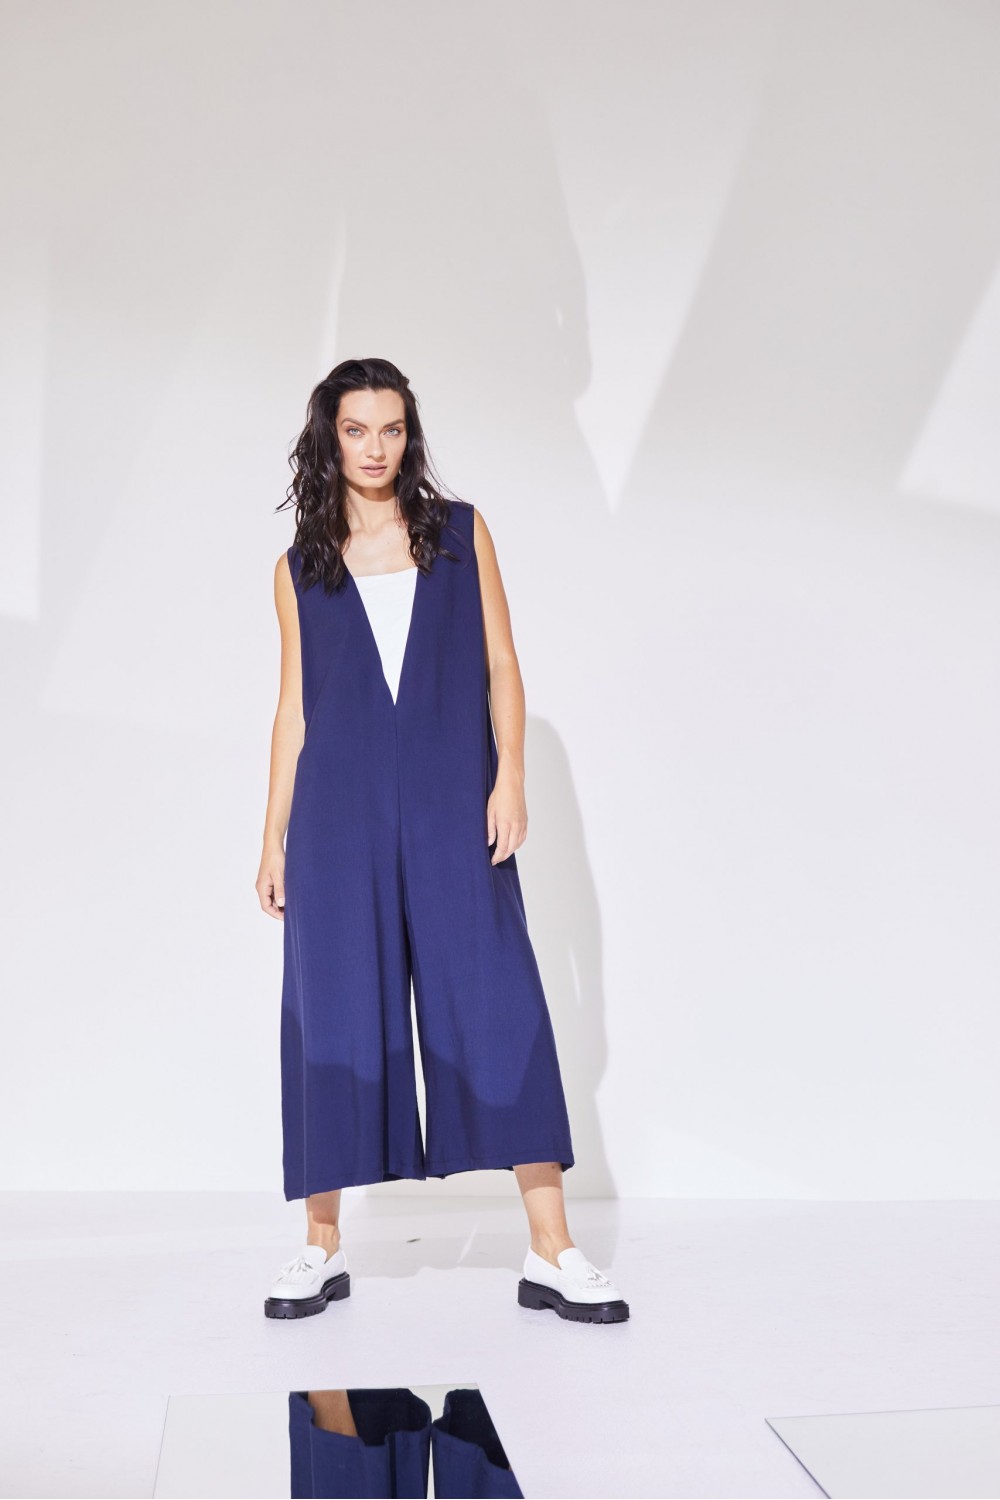 Naya Jumpsuit With Contrast Inset Panel Navy/White